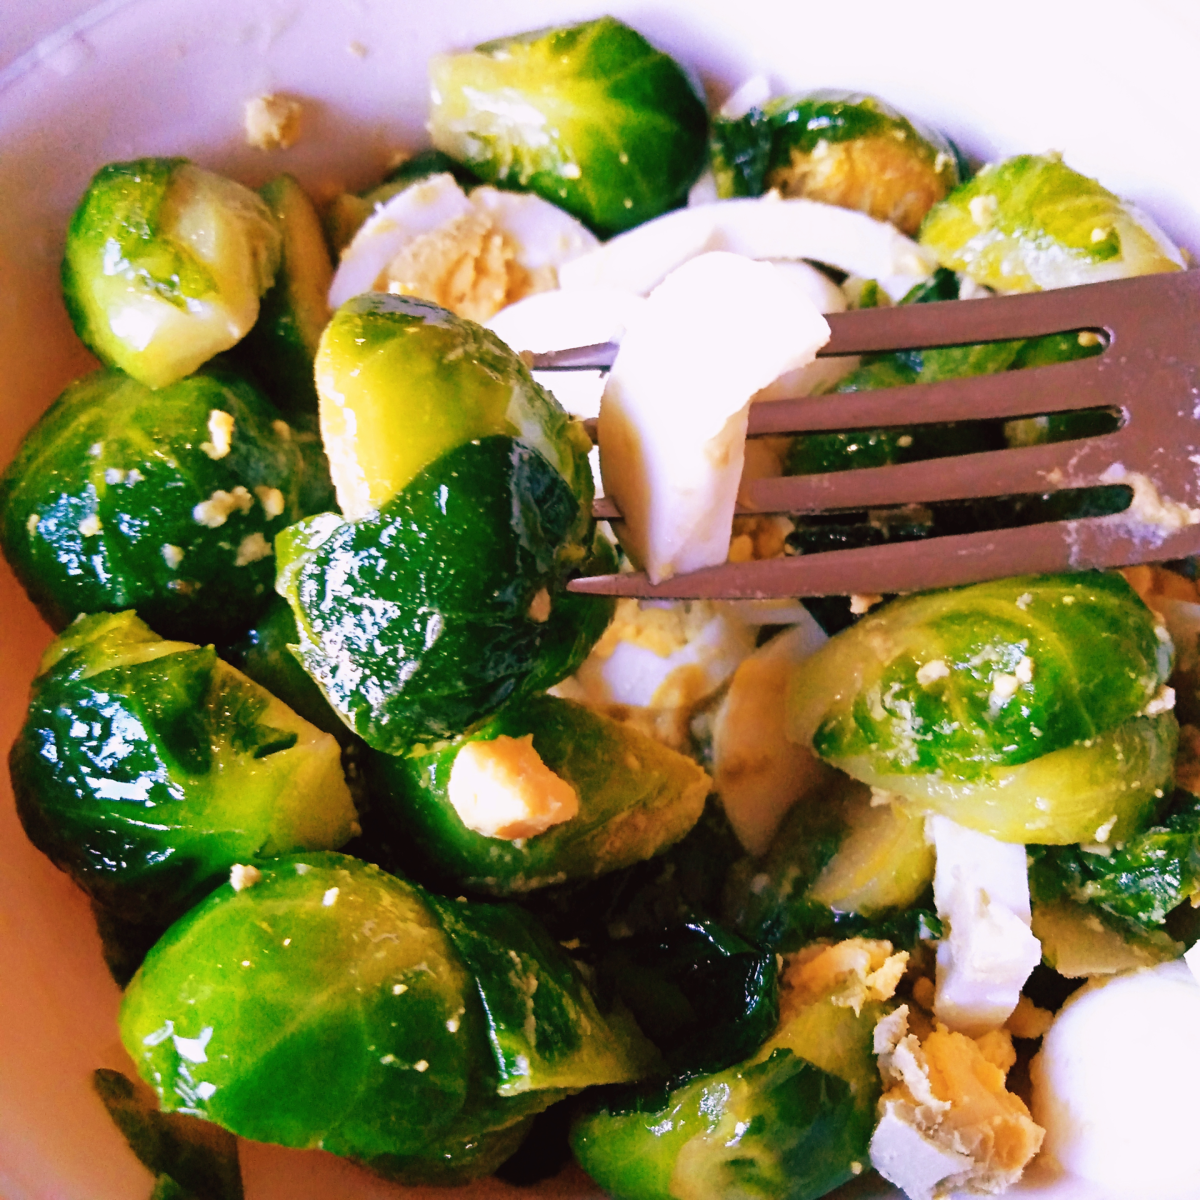 Sautéed Brussels Sprouts With Eggs